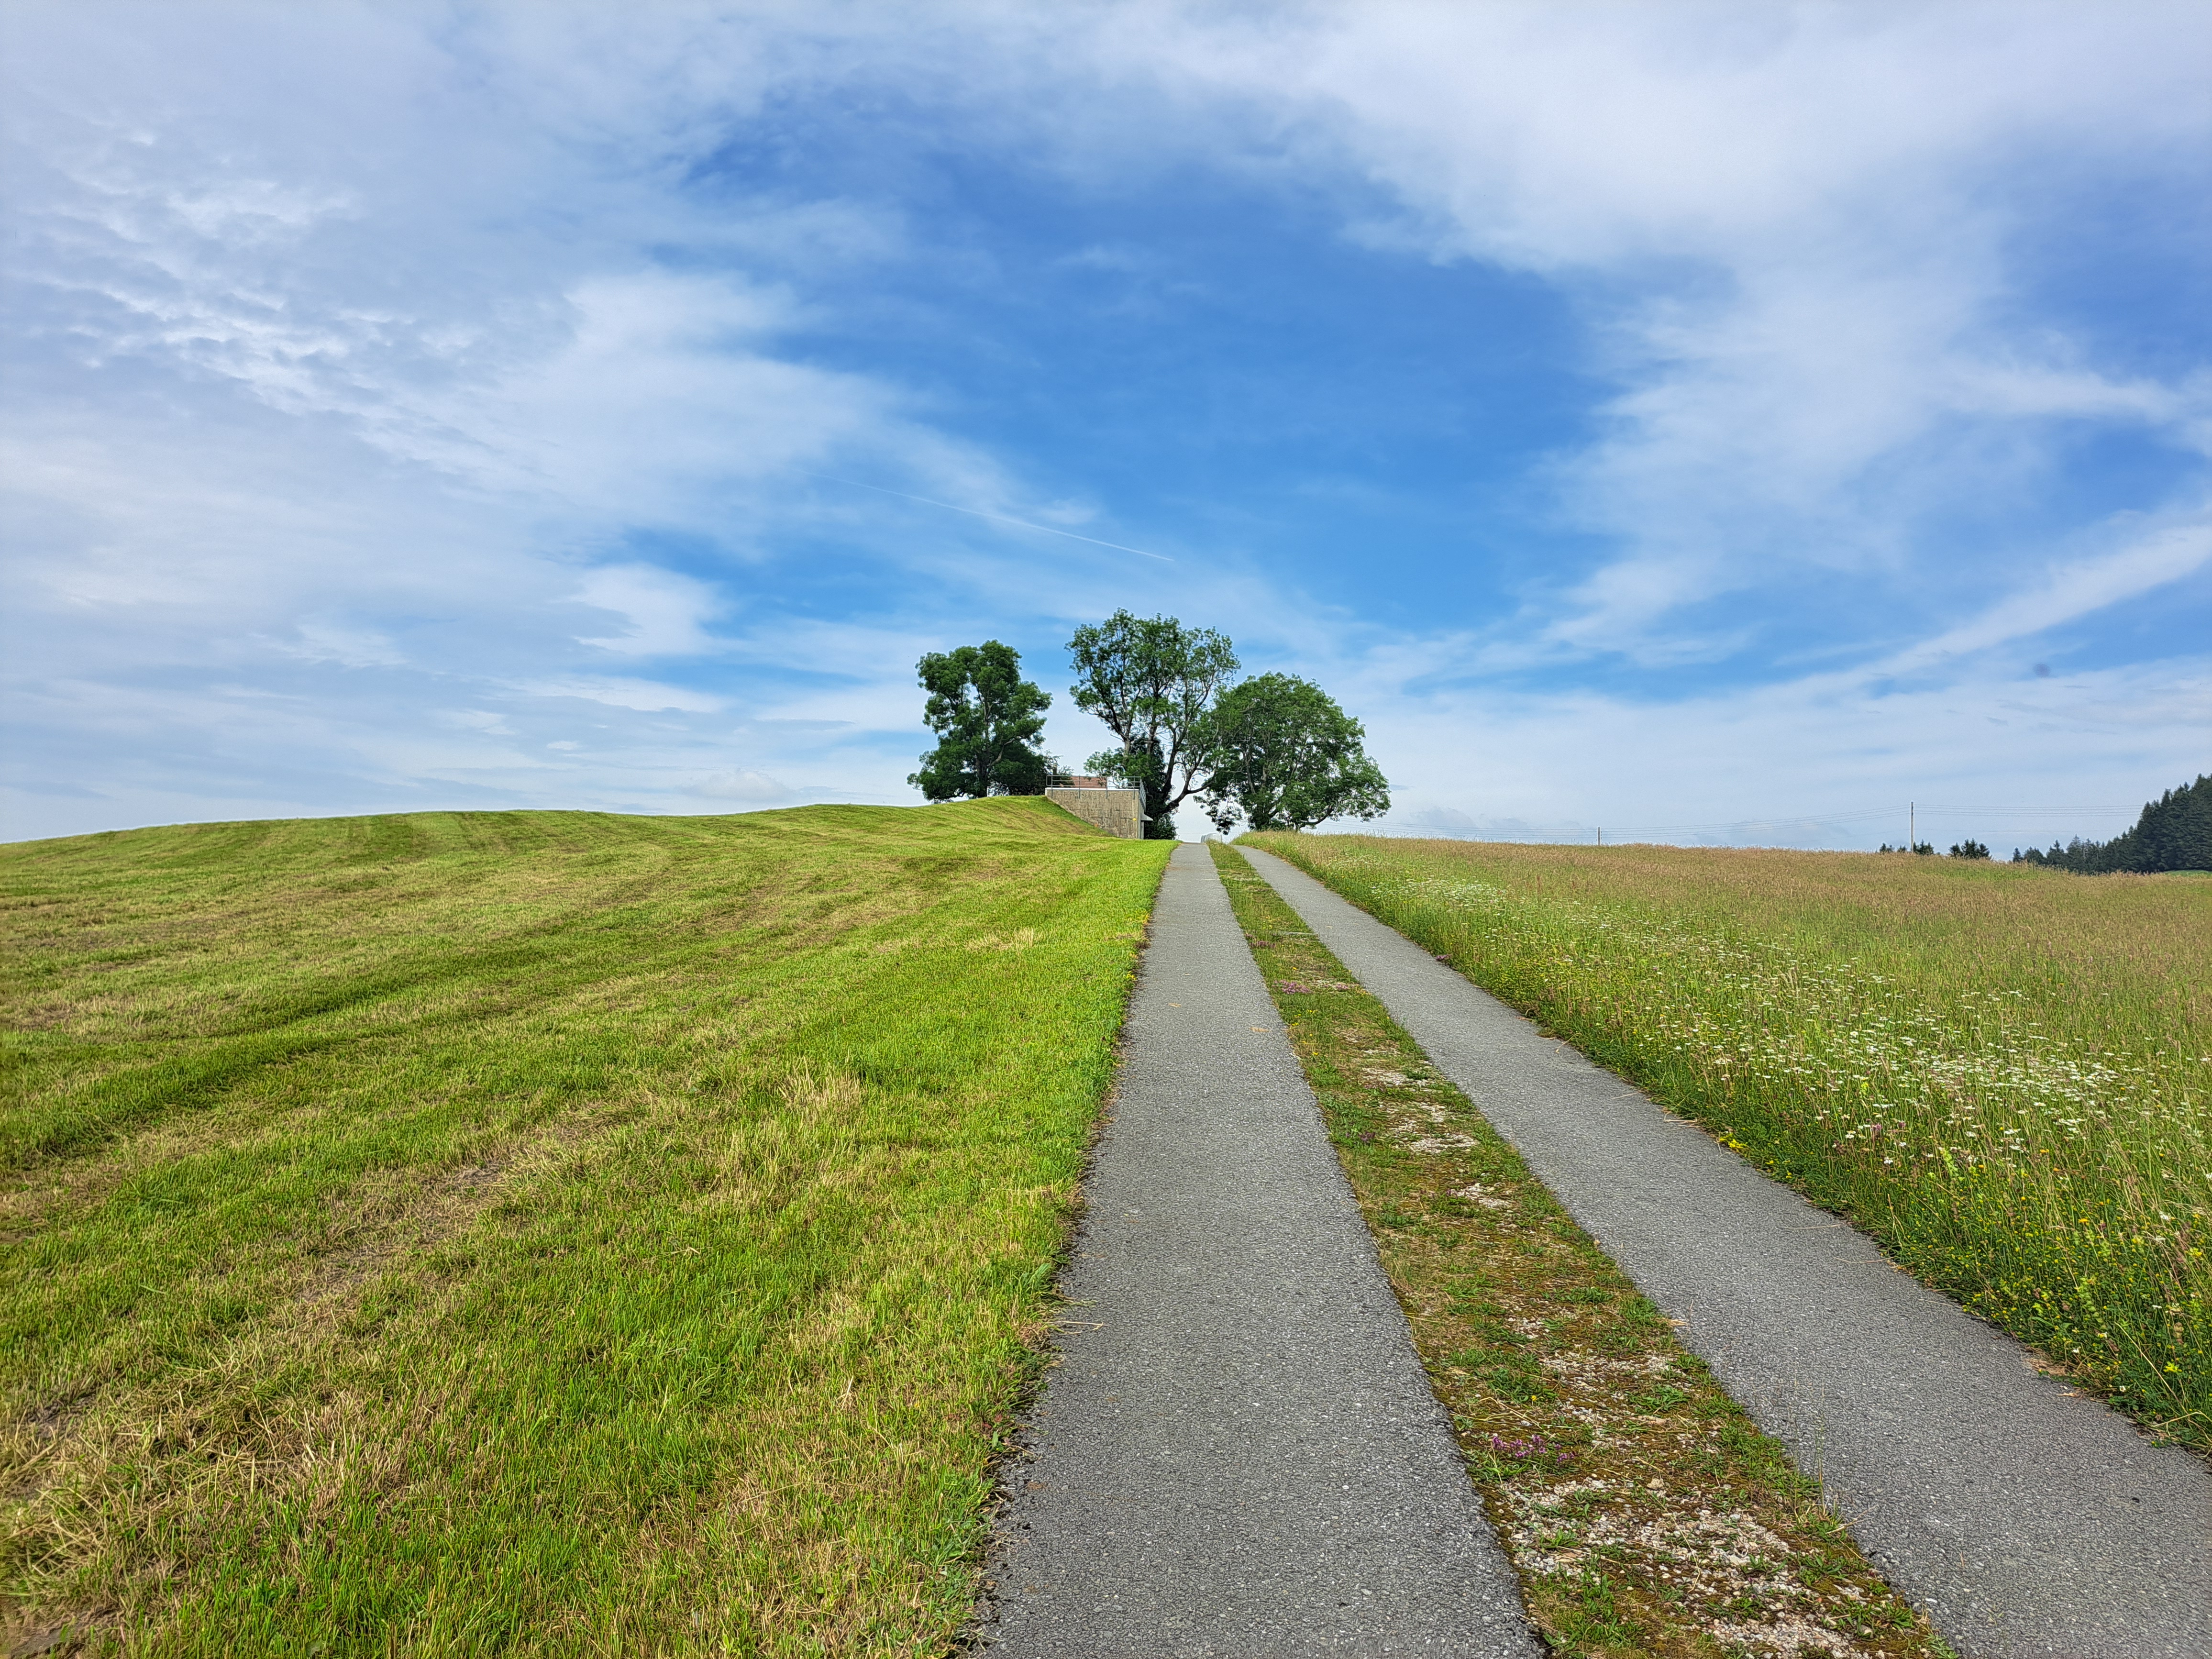 Image: A straight path with cut grass on the left and high grass on the right, leading towards 3 large trees in the center of the image and a blue sky with clouds in the top-halve of the image.